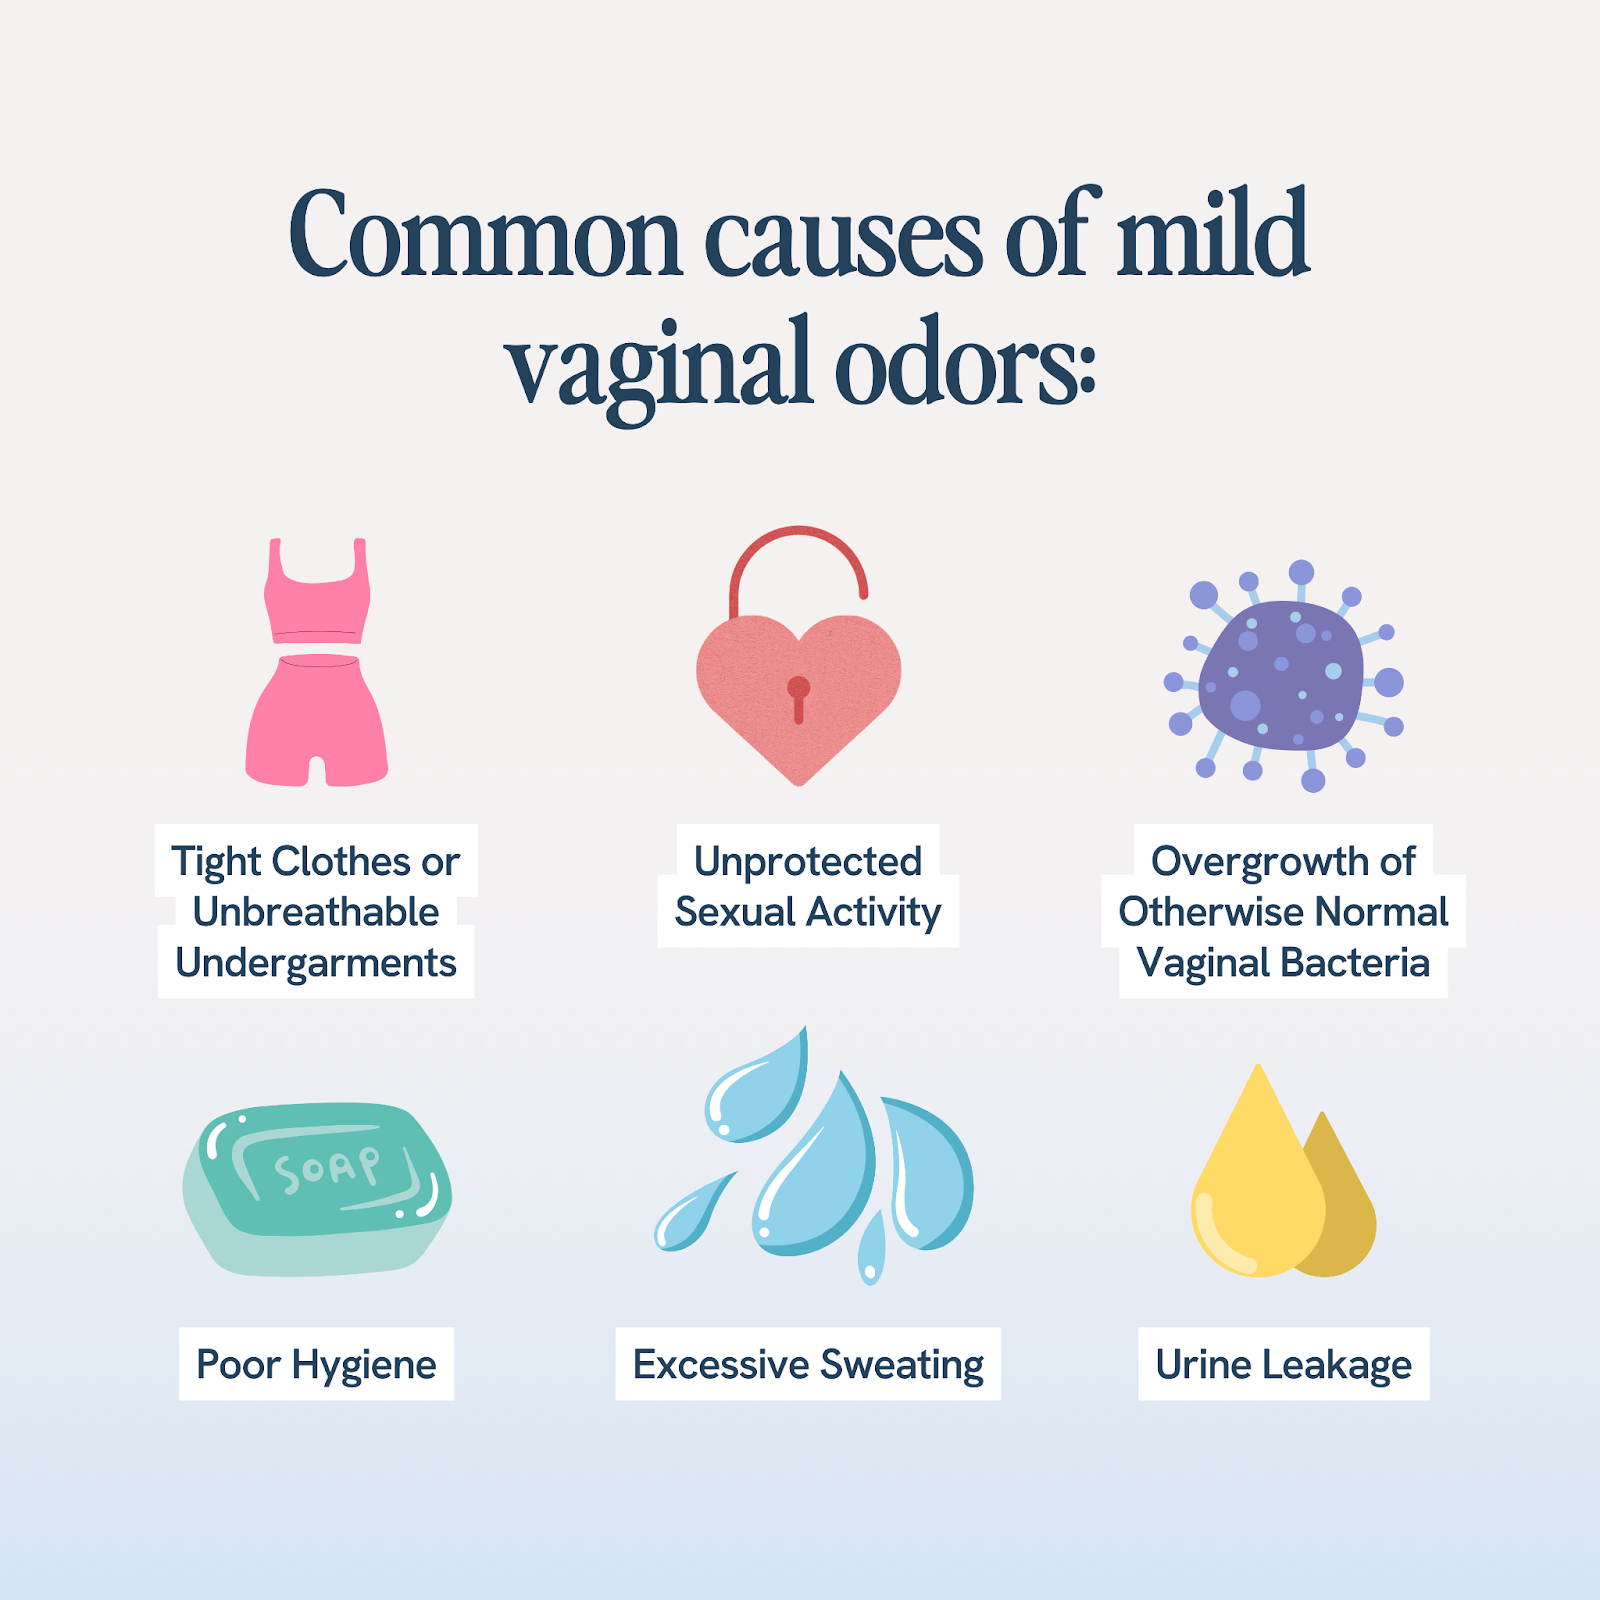 An educational graphic listing 'Common causes of mild vaginal odors:' with simplified icons. Depictions include tight shorts, a heart-shaped lock, bacteria, soap, water droplets, and a yellow drop, signifying tight clothing, unprotected sex, bacterial overgrowth, hygiene, sweating, and urine leakage, respectively